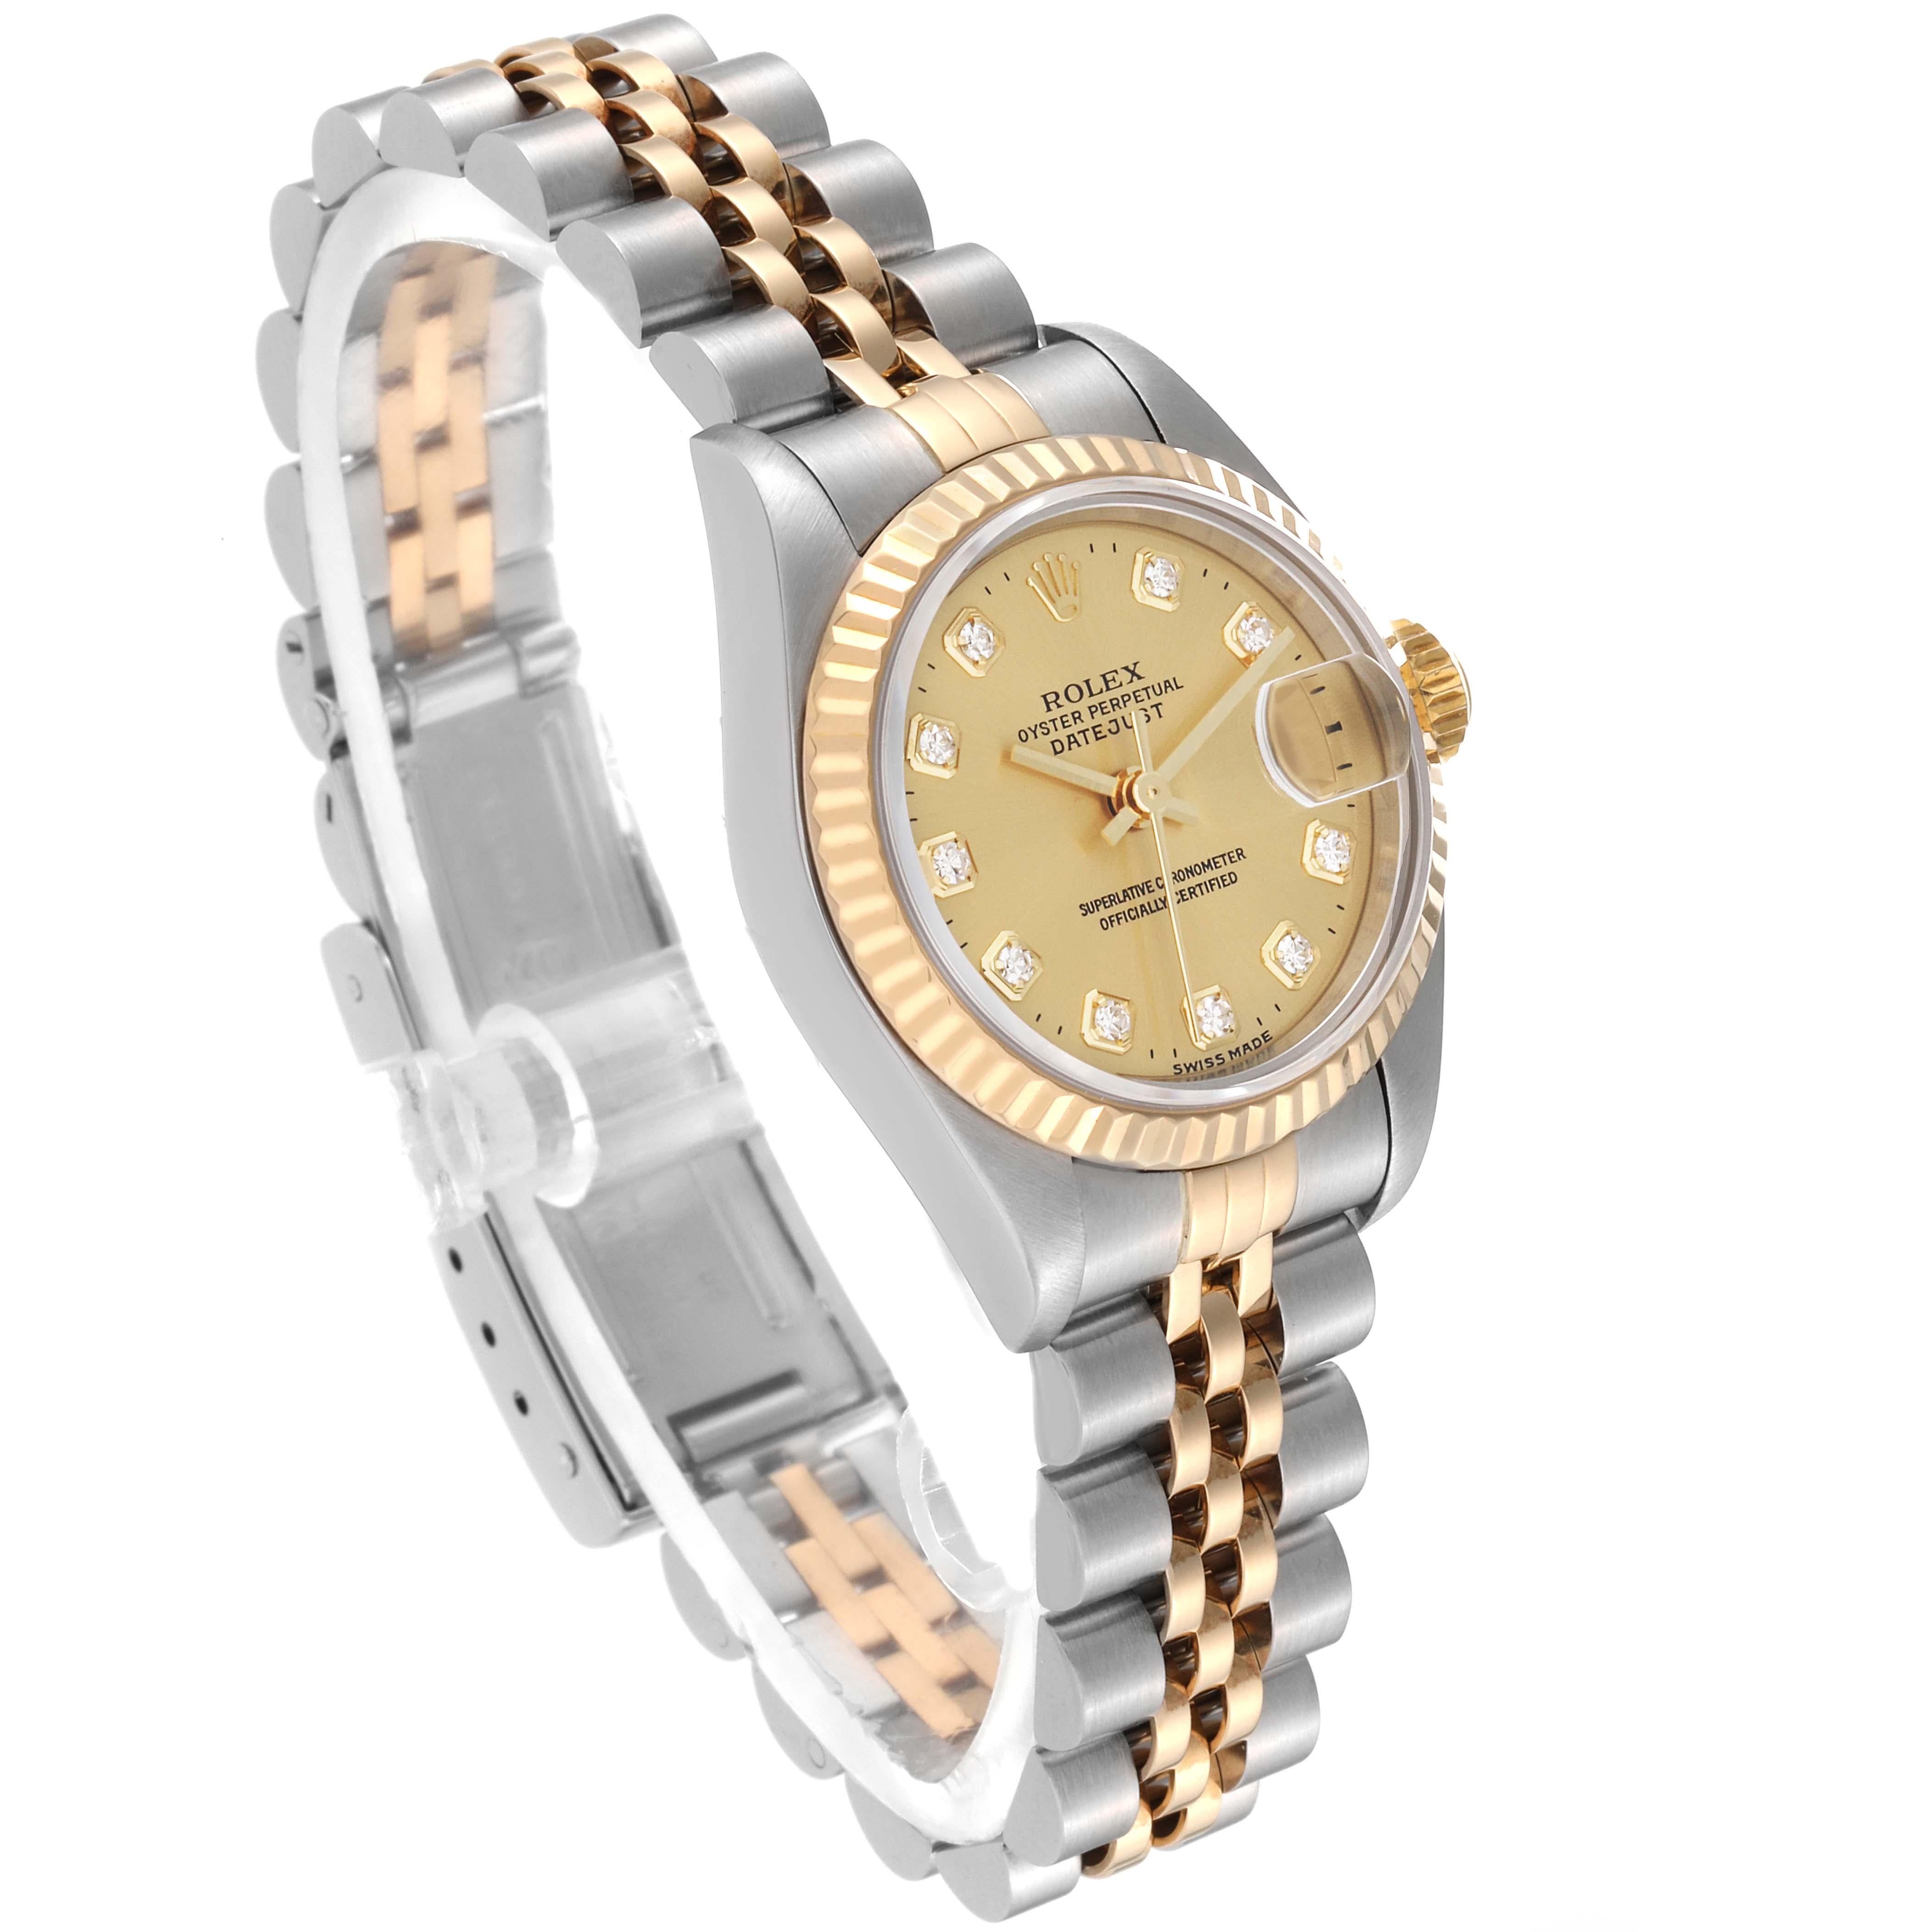 Rolex Datejust Diamond Dial Steel Yellow Gold Ladies Watch 69173 Box Papers 5